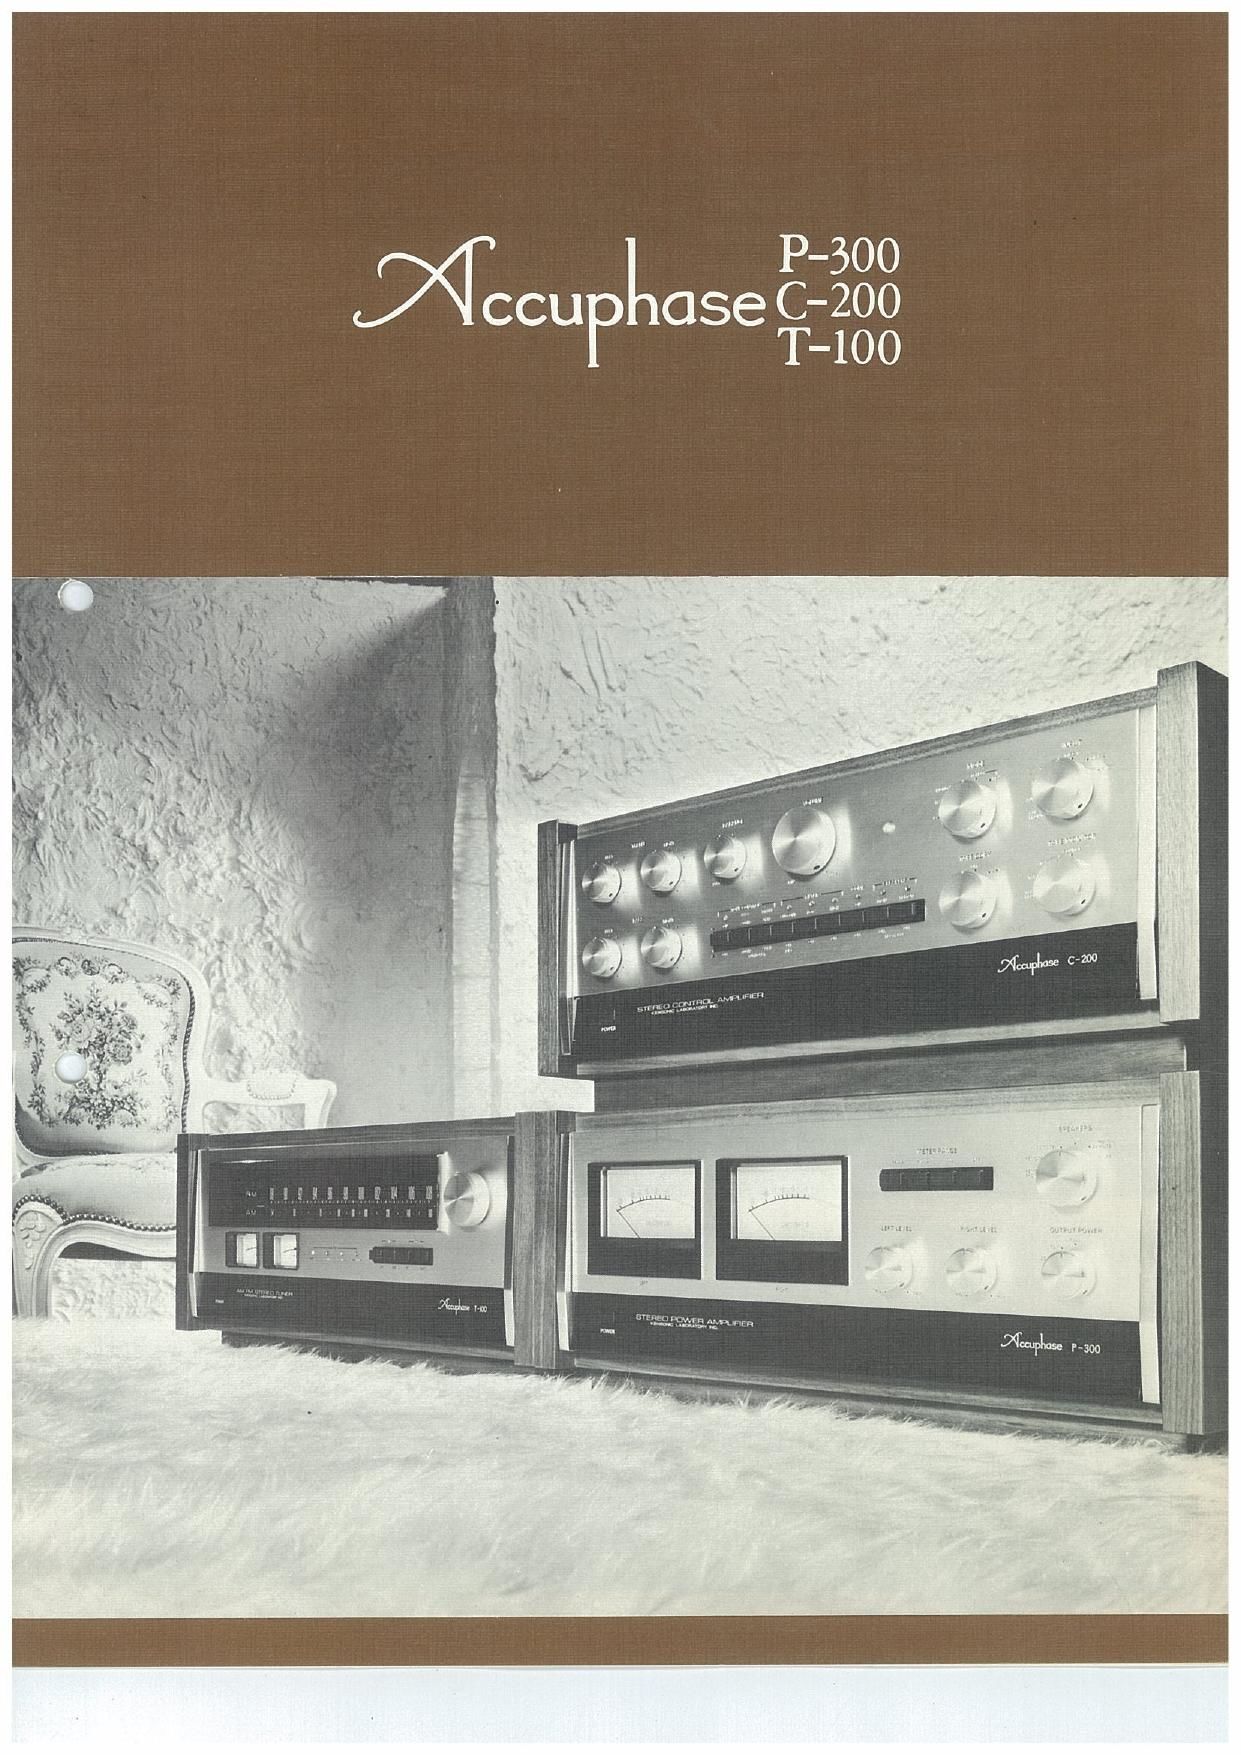 Accuphase P 300 Brochure